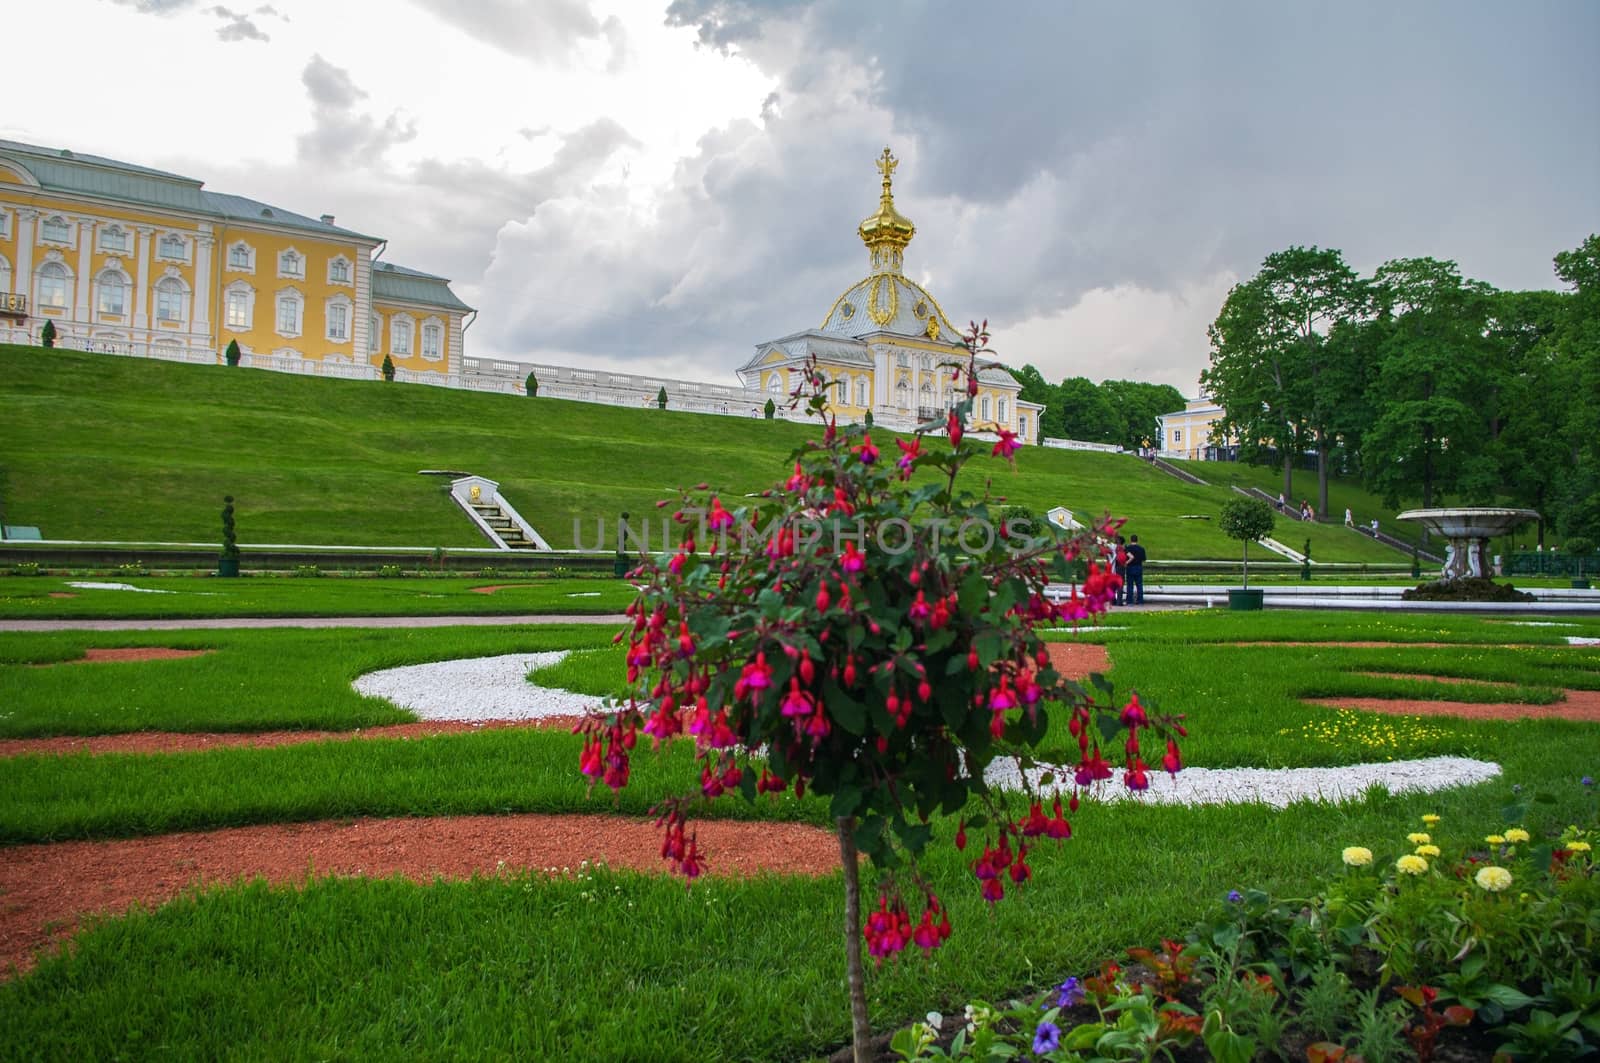 PETERHOF, SAINT PETERSBURG, RUSSIA - JUNE 06, 2014: the Upper Park palace was included in the UNESCO World Heritage List by evolutionnow